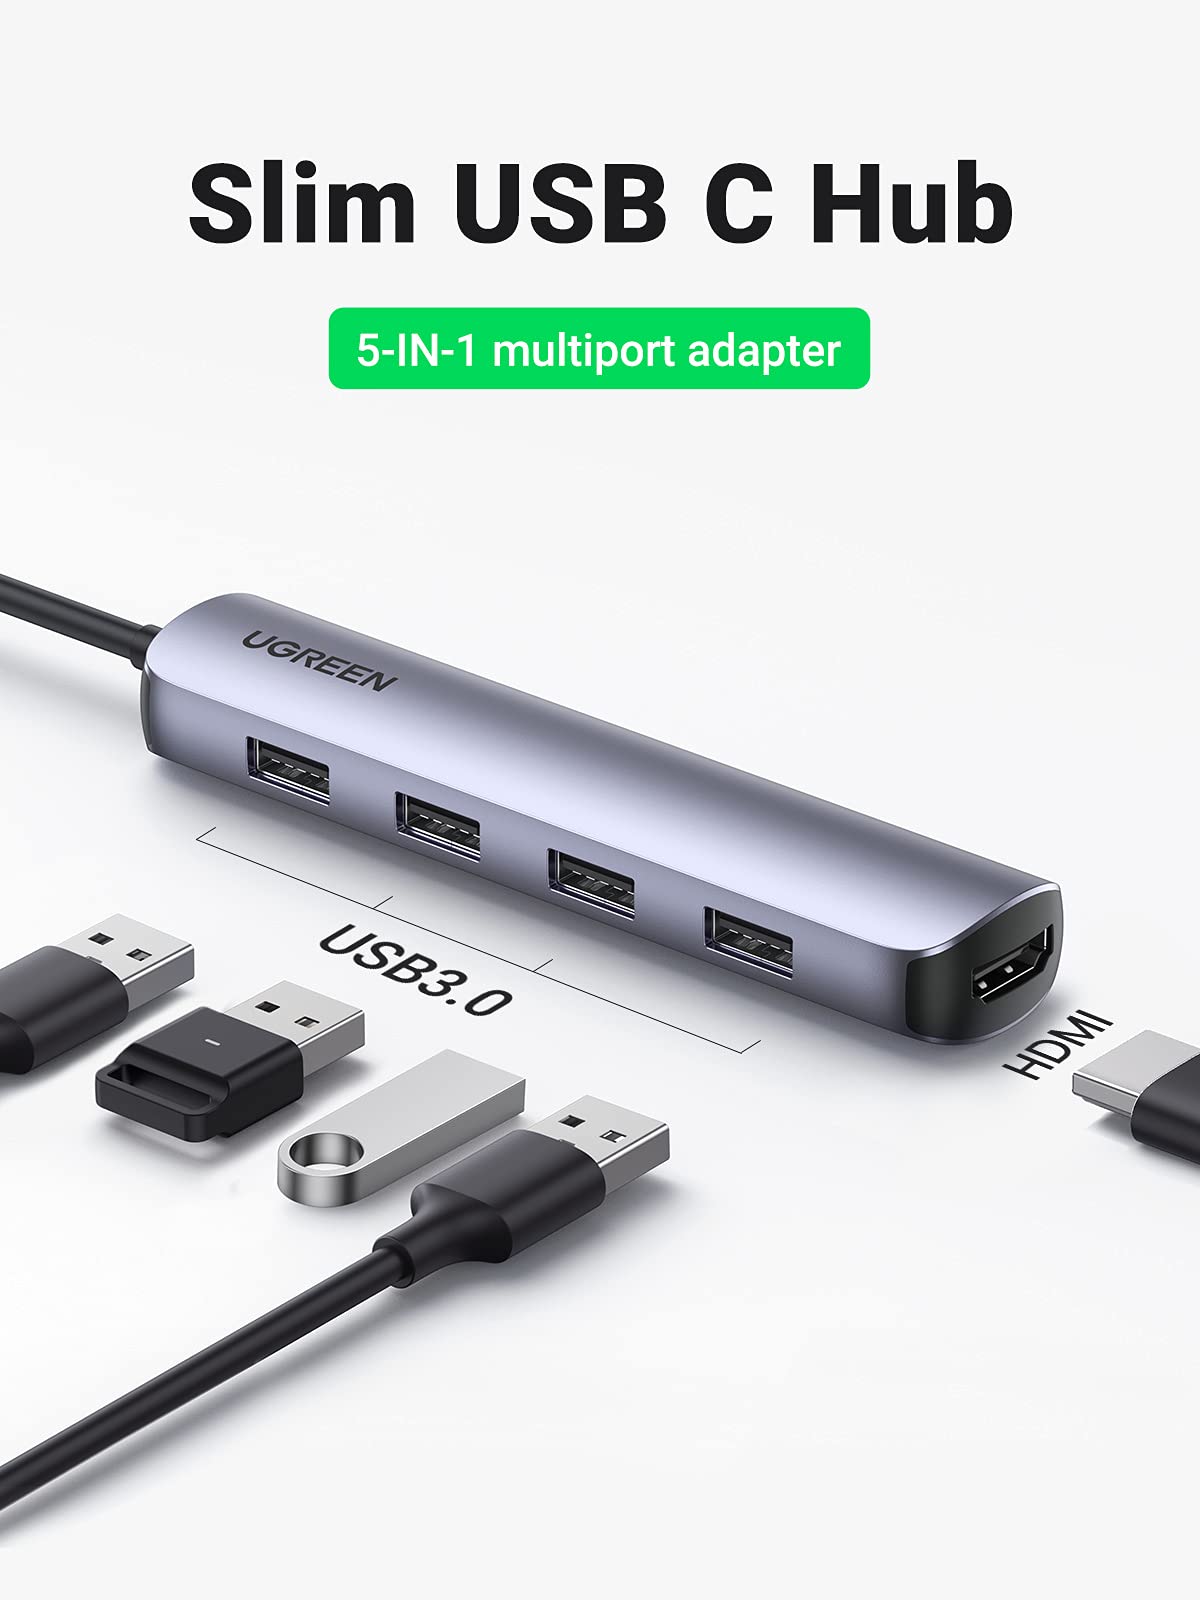 UGREEN USB C Multiport Adapter USB C Hub HDMI Ultra Slim with 4 USB 3.0 Ports for Data Transfer 4K HDMI Output Compatible with Macbook Pro Macbook Air iPad Pro XPS and More